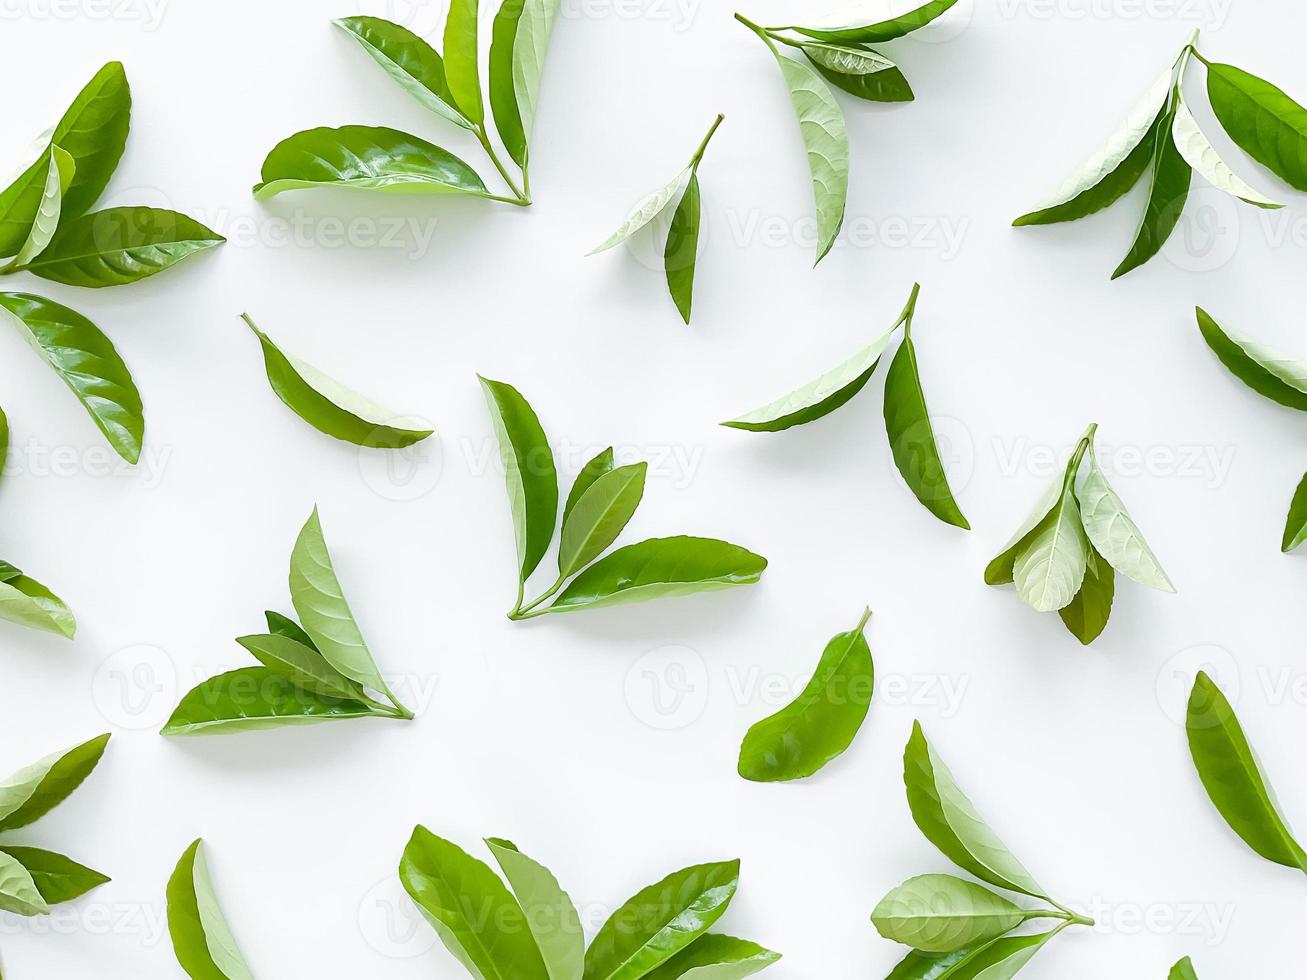 green leaves on a white background. Large fresh decorative leaves. photo